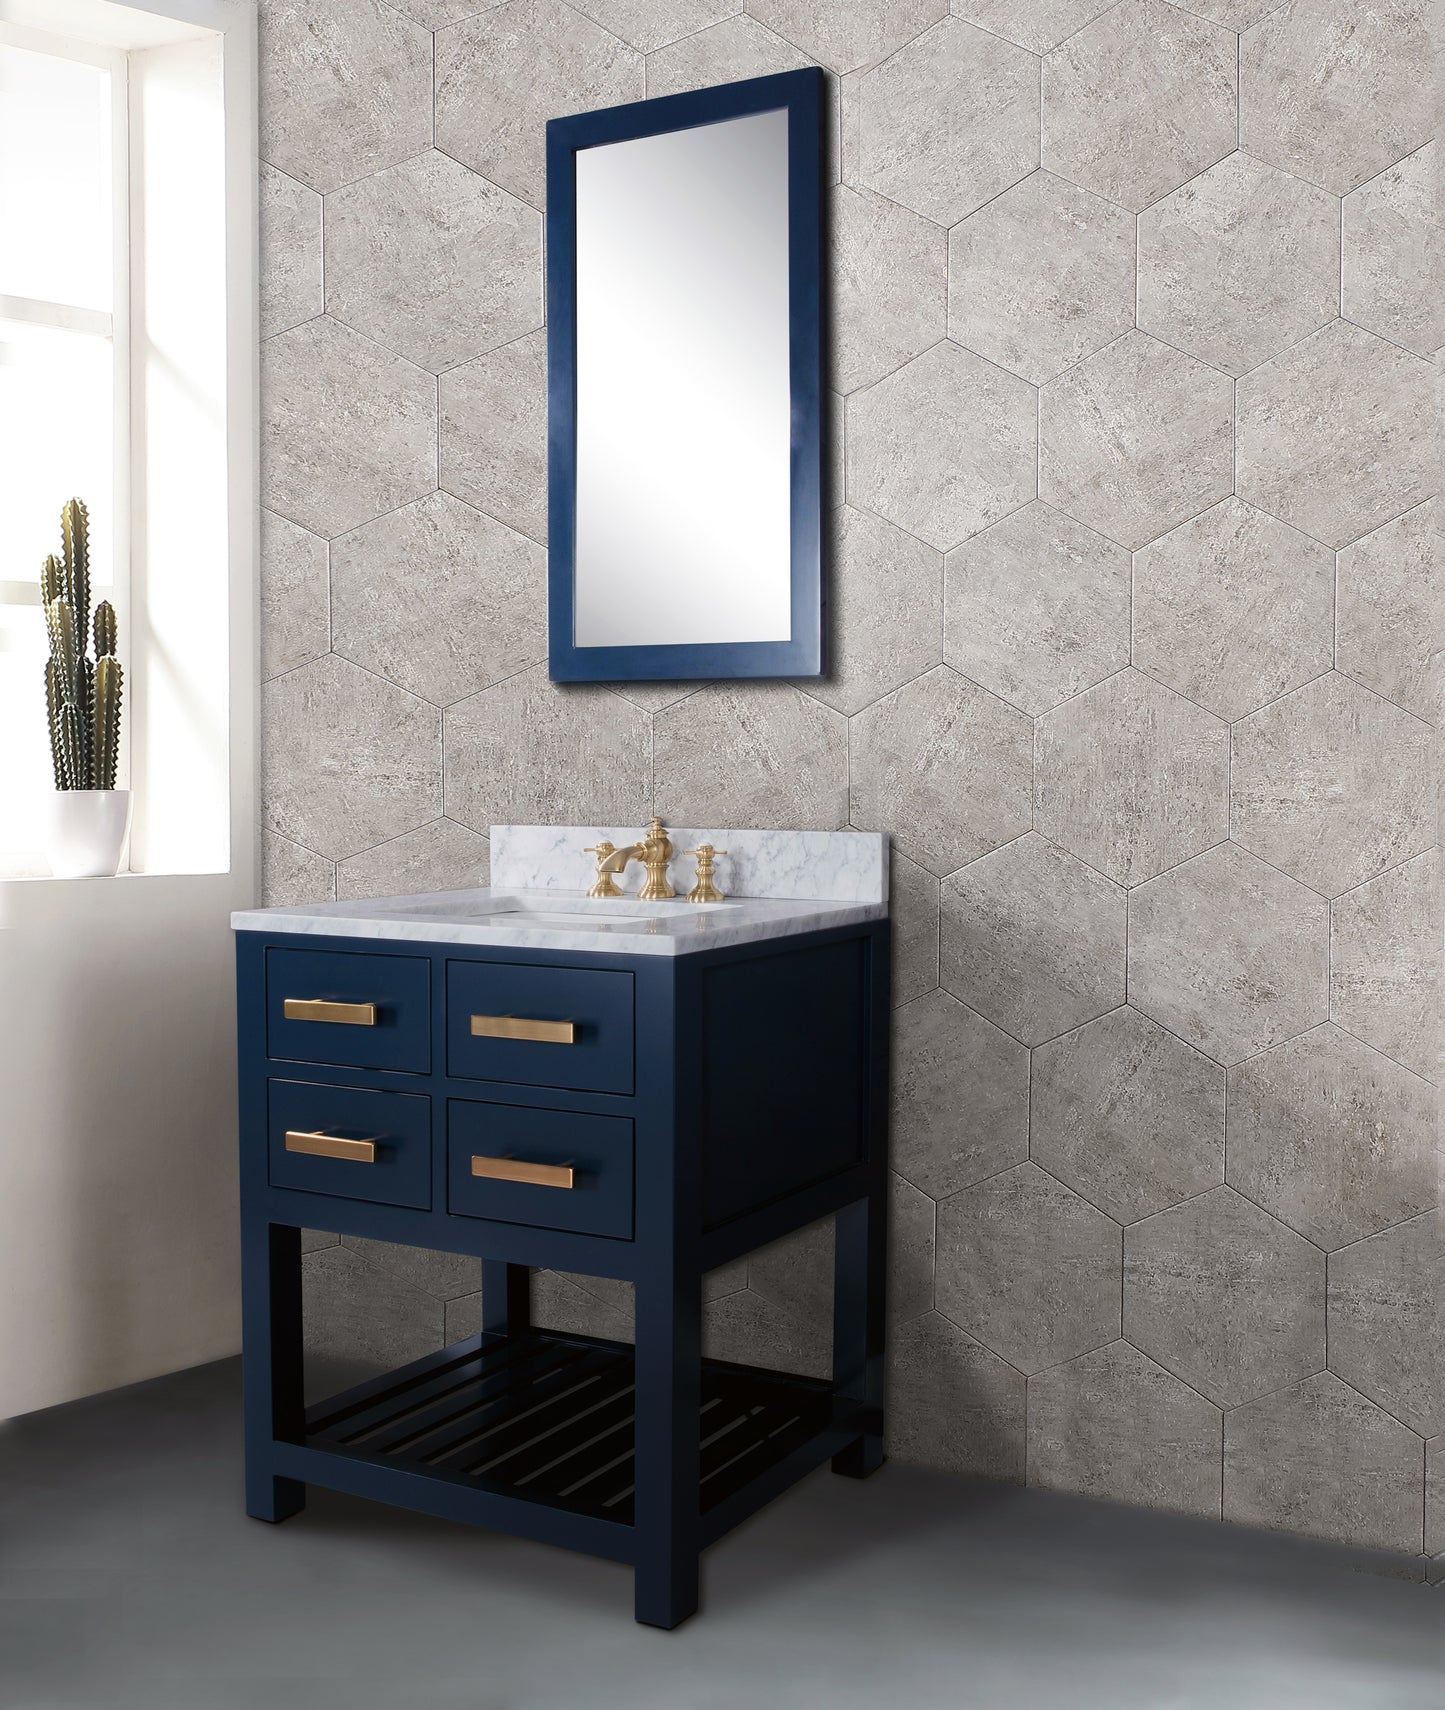 Water Creation 30 Inch Single Sink Bathroom Vanity With F2-0013 Faucet And Mirror From The Madalyn Collection - Luxe Bathroom Vanities